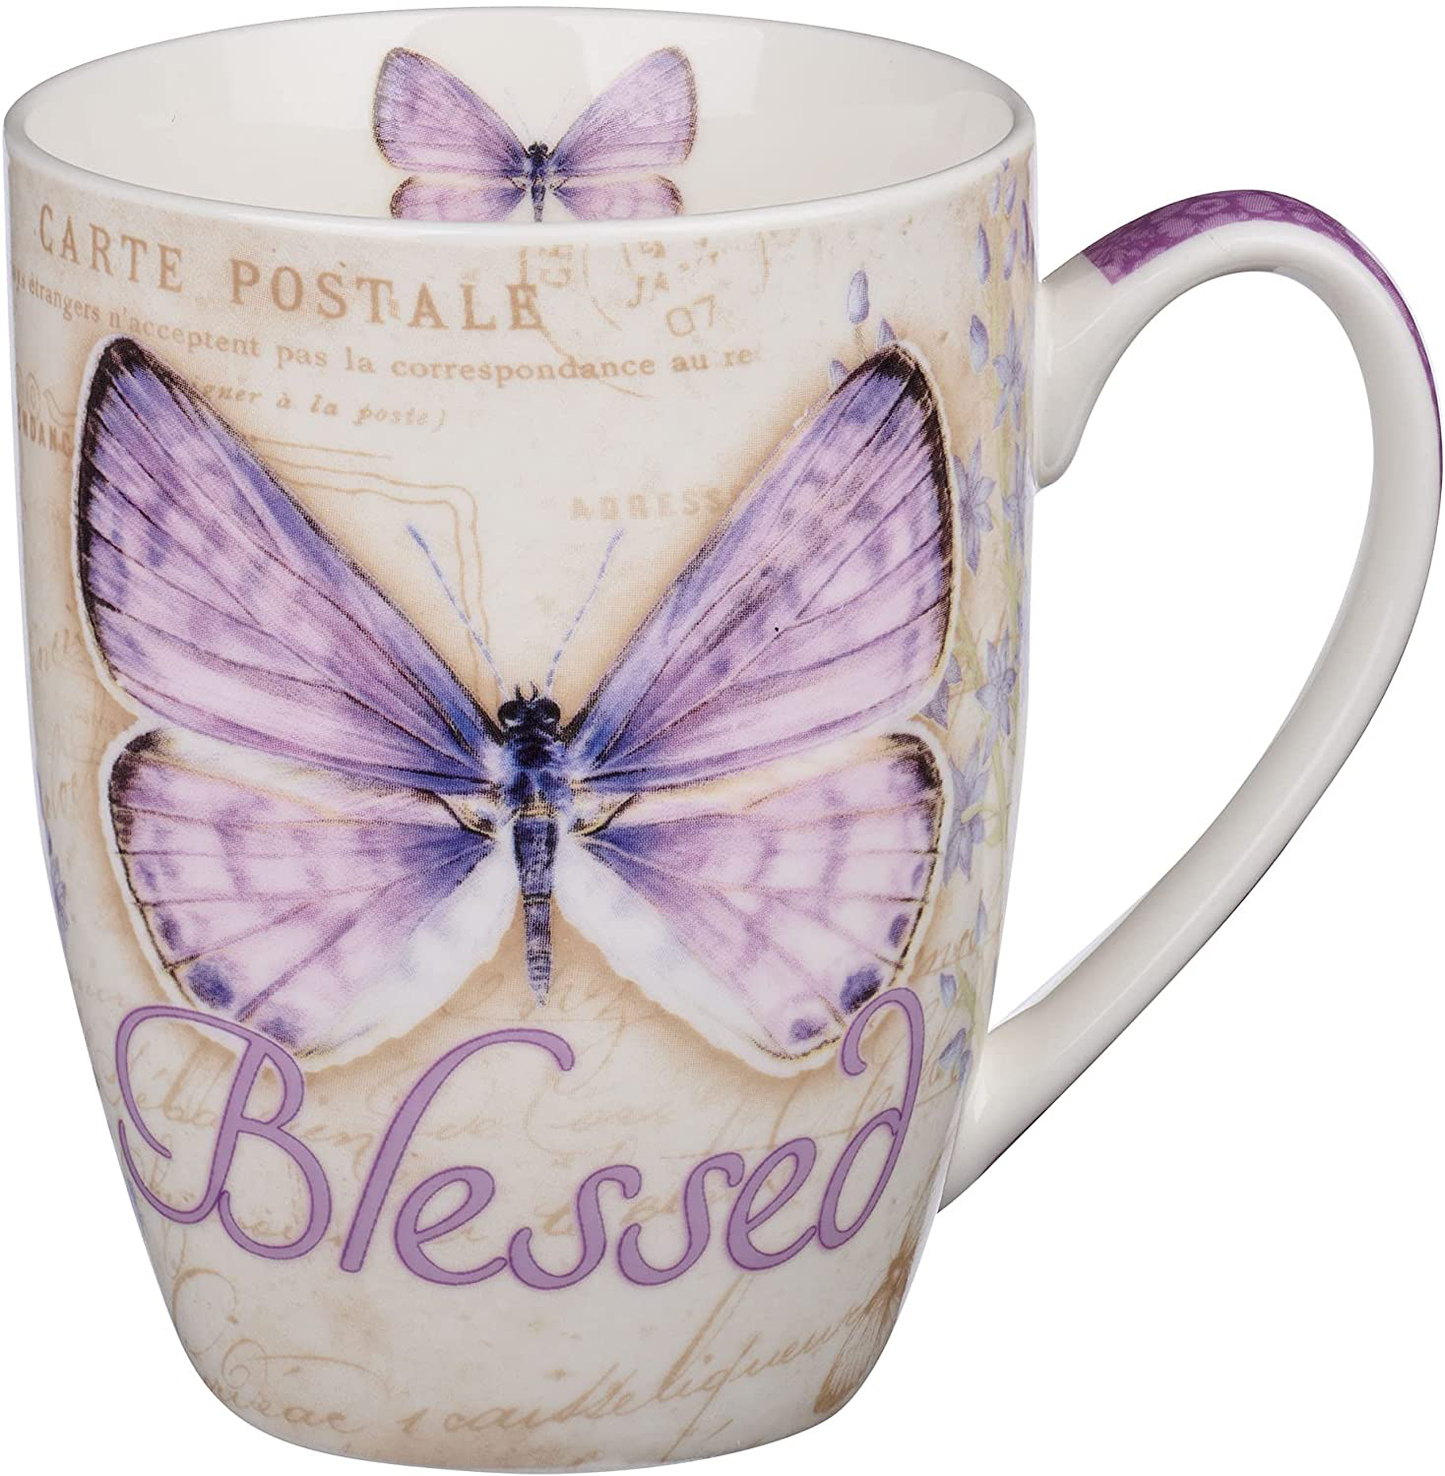 Blessed Butterfly Mug – Botanic Purple Butterfly Coffee Mug w/Jeremiah 17:7, Bible Verse Mug for Women and Men – Inspirational Coffee Cup and Christian Gifts (12-ounce Ceramic Cup)